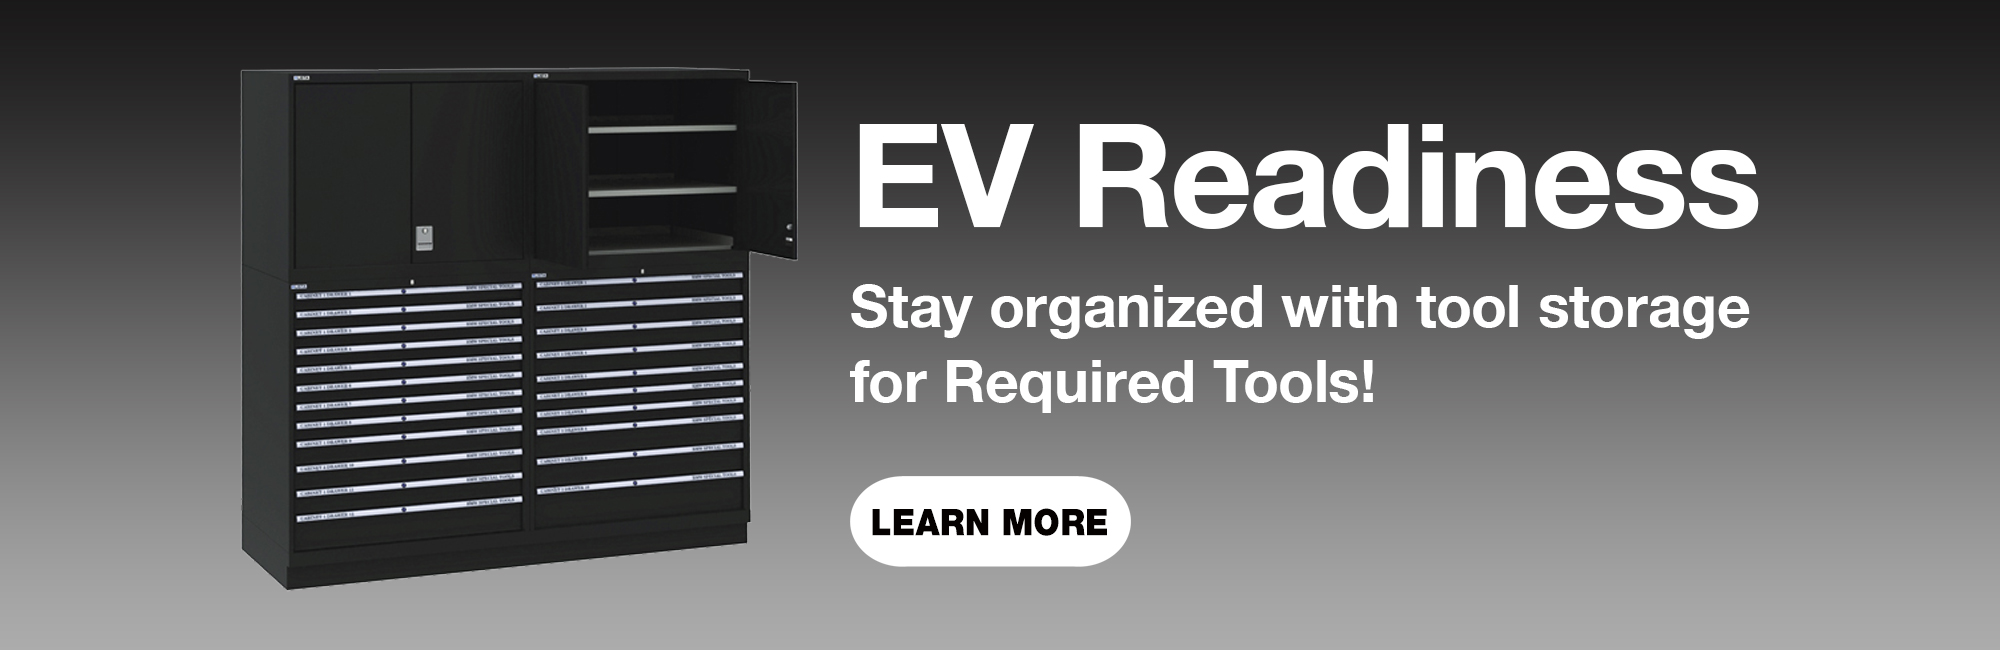 stay organized with required tool storage